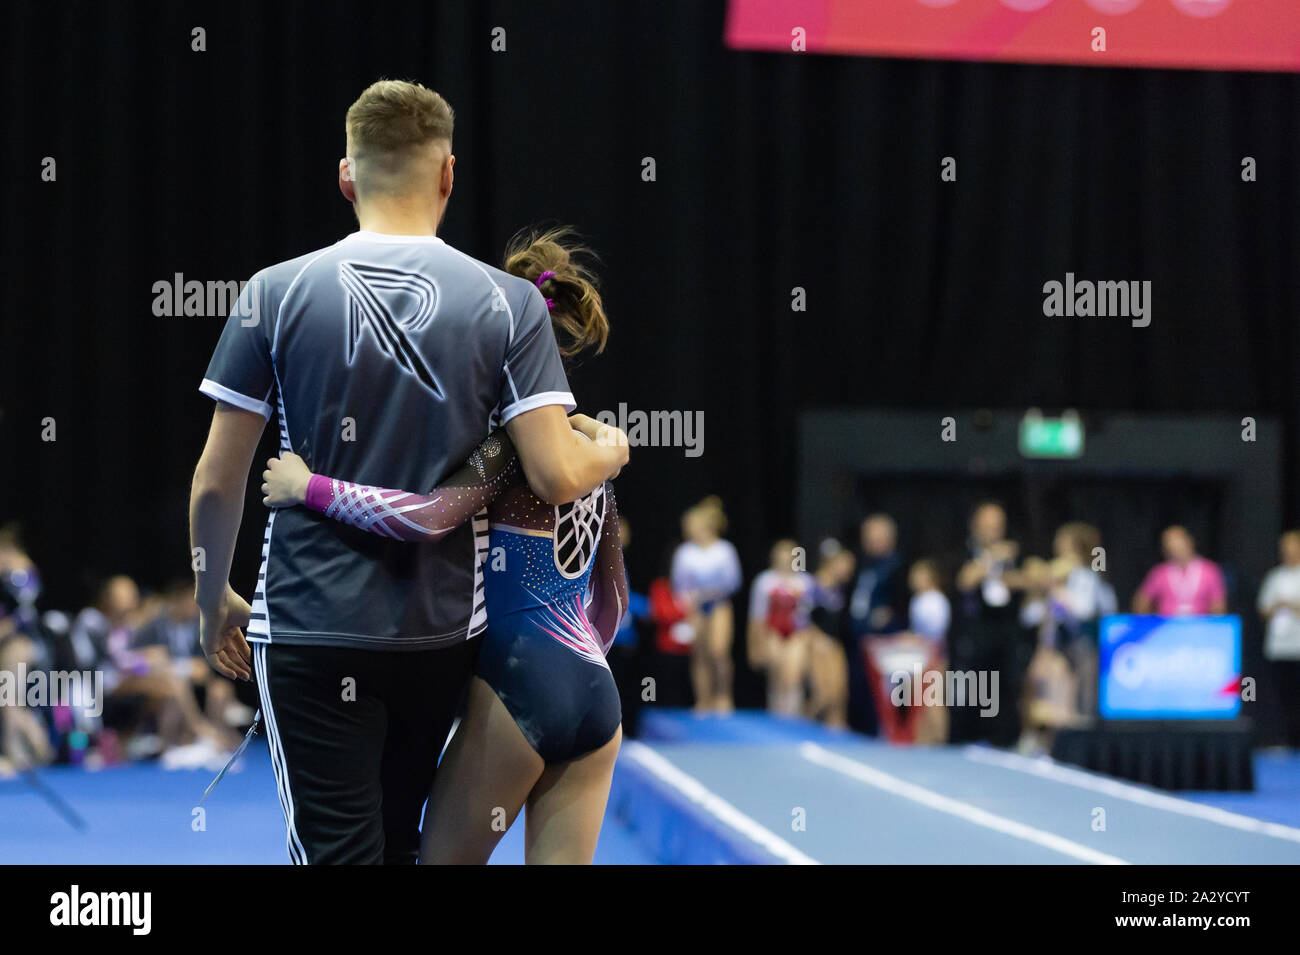 Birmingham, England, UK. 28 September 2019. Head coach Rob Owen (l) and gymnast Alicia Field (r) (Revolution Gymnastics Club) in action during the Trampoline, Tumbling and DMT British Championship Qualifiers at the Arena Birmingham, Birmingham, UK. Stock Photo